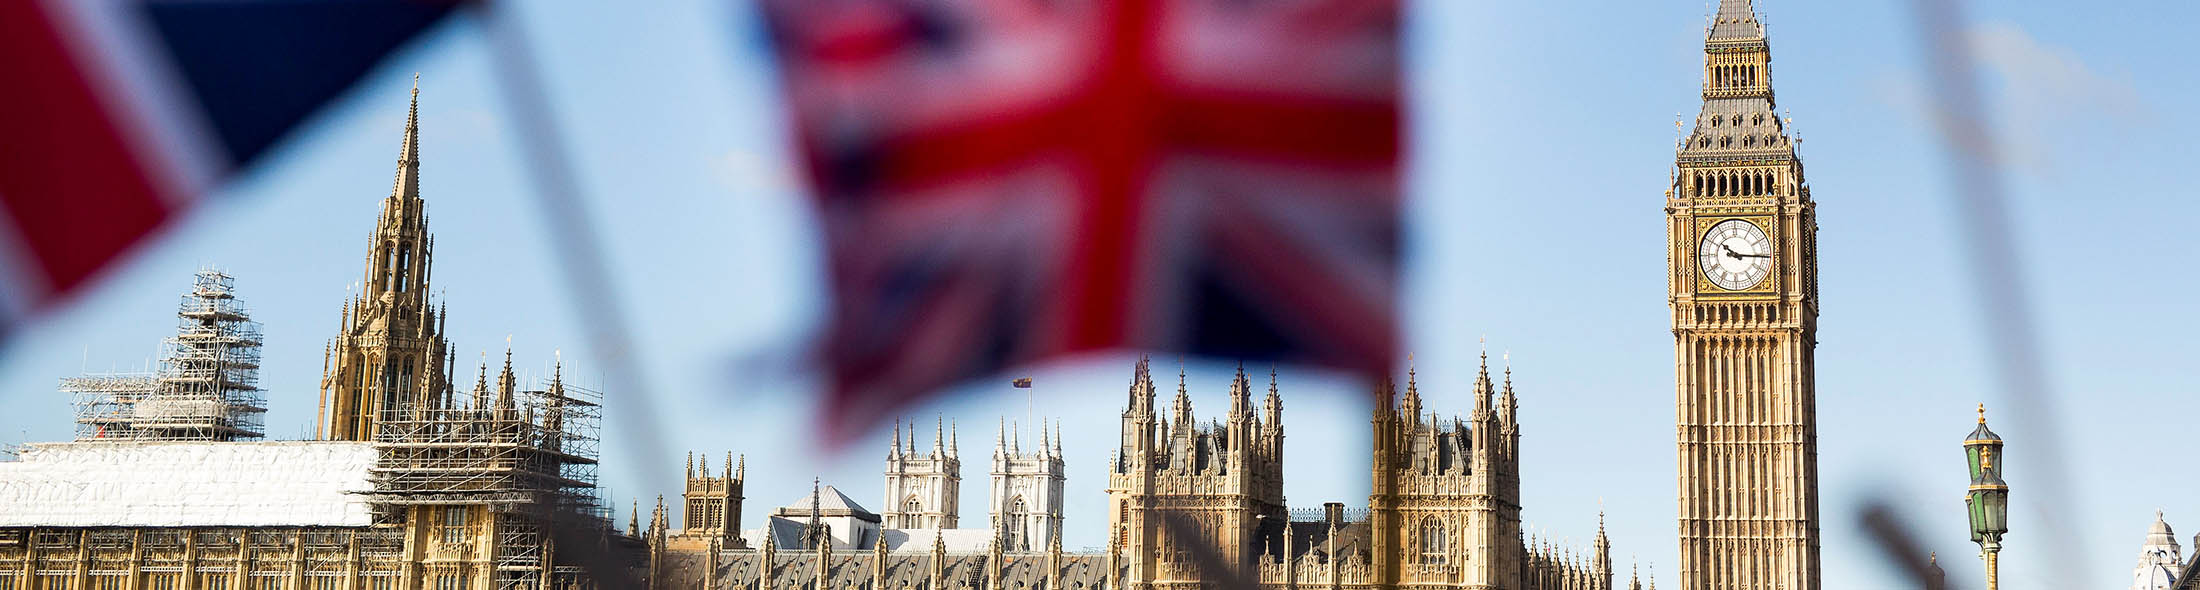 A display of U.K., Union Jack flags fly in front of The Houses of Parliament, in London, U.K., on Monday, Feb. 15, 2016. U.K. lawmakers are not the only ones bracing for a tough few months before Britain's referendum on its European Union membership. A gauge of expected volatility for the pound near the highest since 2011 shows traders are expecting a rough ride too.
